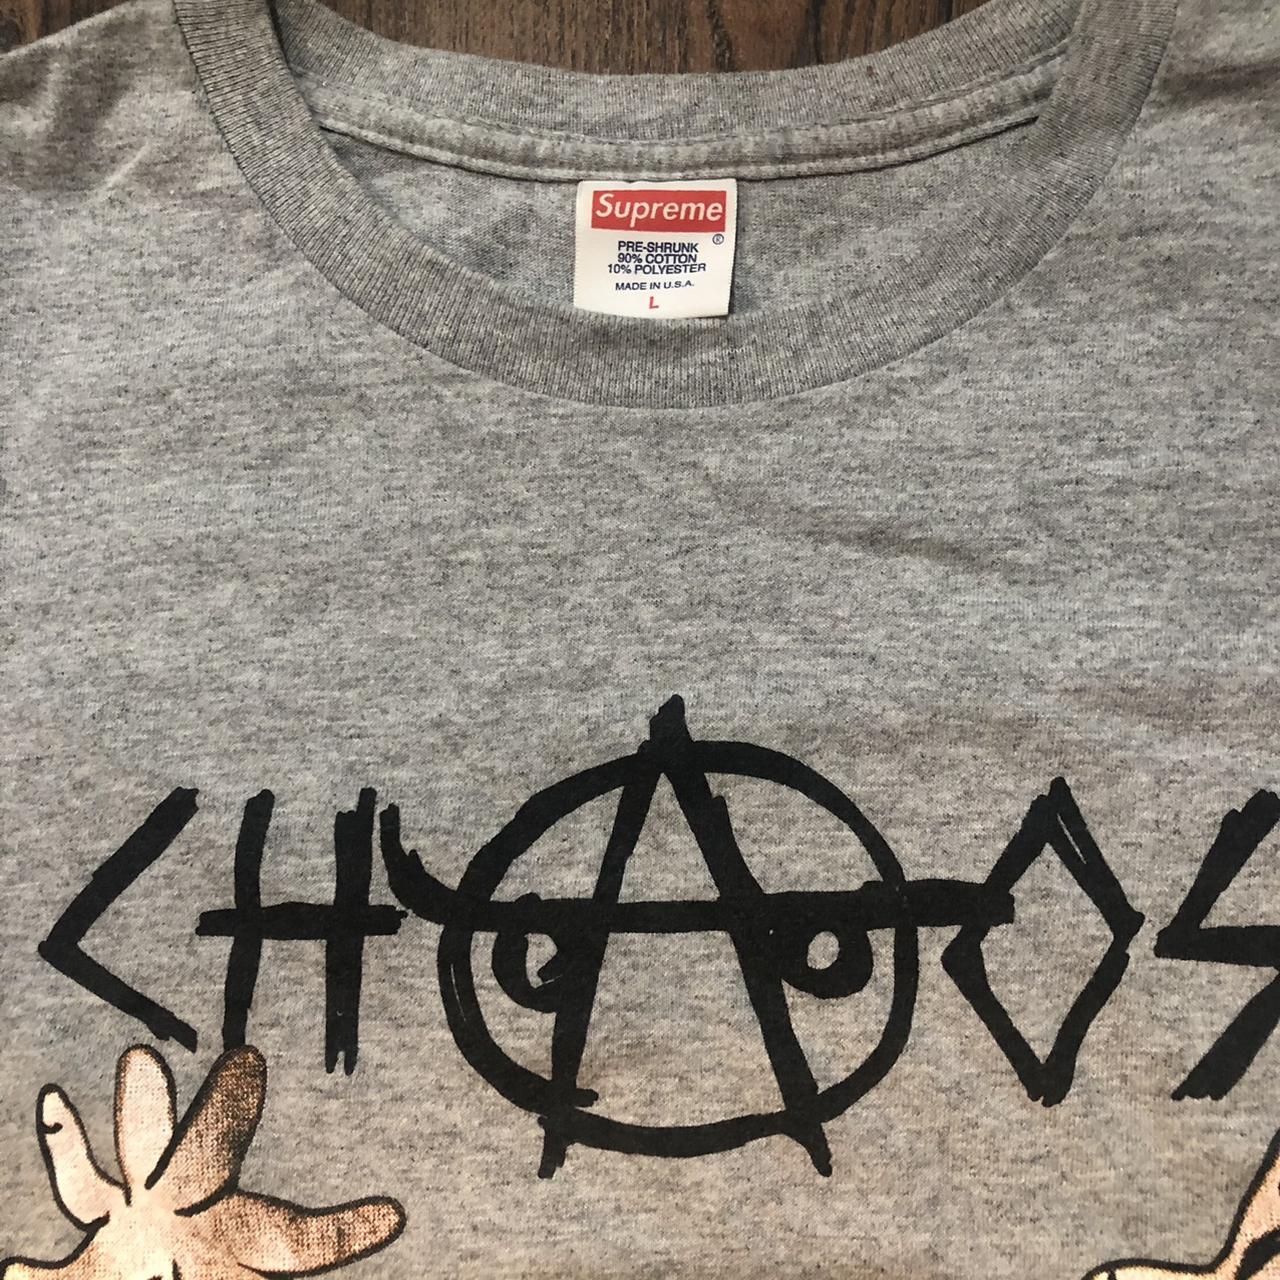 Supreme Chaos T-shirt featuring Pablo Picasso’s...